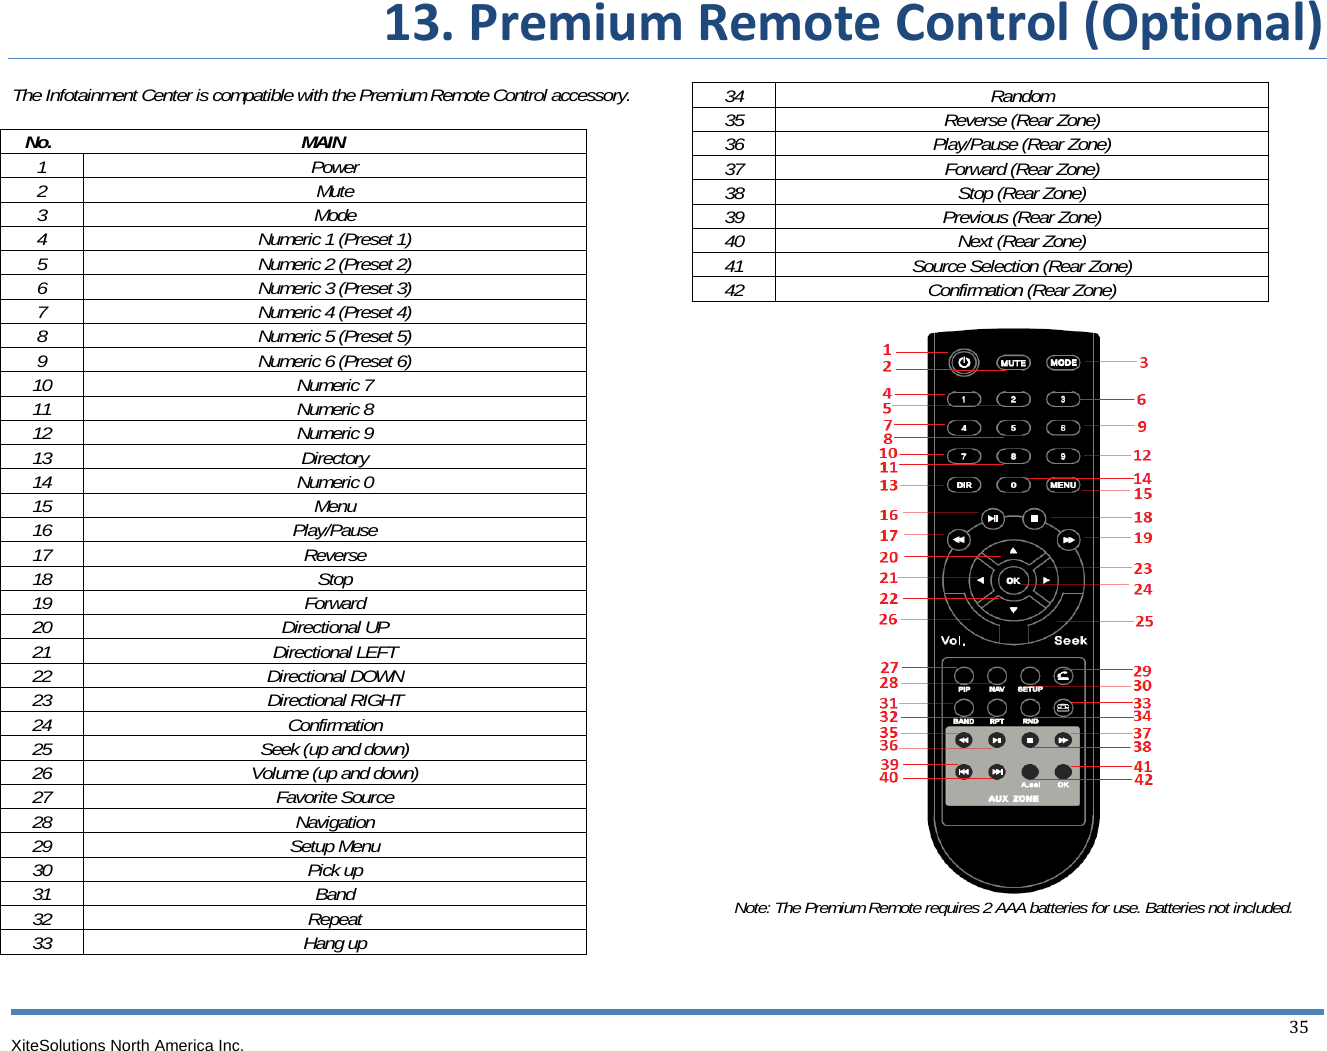  13.PremiumRemoteControl(Optional)XiteSolutions North America Inc.  35 The Infotainment Center is compatible with the Premium Remote Control accessory.     No.                                                      MAIN 1 Power 2 Mute 3 Mode 4  Numeric 1 (Preset 1) 5  Numeric 2 (Preset 2) 6  Numeric 3 (Preset 3) 7  Numeric 4 (Preset 4) 8  Numeric 5 (Preset 5) 9  Numeric 6 (Preset 6) 10 Numeric 7 11 Numeric 8 12 Numeric 9 13 Directory 14 Numeric 0 15 Menu 16 Play/Pause 17 Reverse 18 Stop 19 Forward 20 Directional UP 21 Directional LEFT 22 Directional DOWN 23 Directional RIGHT 24 Confirmation 25  Seek (up and down) 26  Volume (up and down) 27 Favorite Source 28 Navigation 29 Setup Menu 30 Pick up 31 Band 32 Repeat 33 Hang up   34 Random 35 Reverse (Rear Zone) 36  Play/Pause (Rear Zone) 37 Forward (Rear Zone) 38  Stop (Rear Zone) 39  Previous (Rear Zone) 40  Next (Rear Zone) 41  Source Selection (Rear Zone) 42  Confirmation (Rear Zone)   Note: The Premium Remote requires 2 AAA batteries for use. Batteries not included.